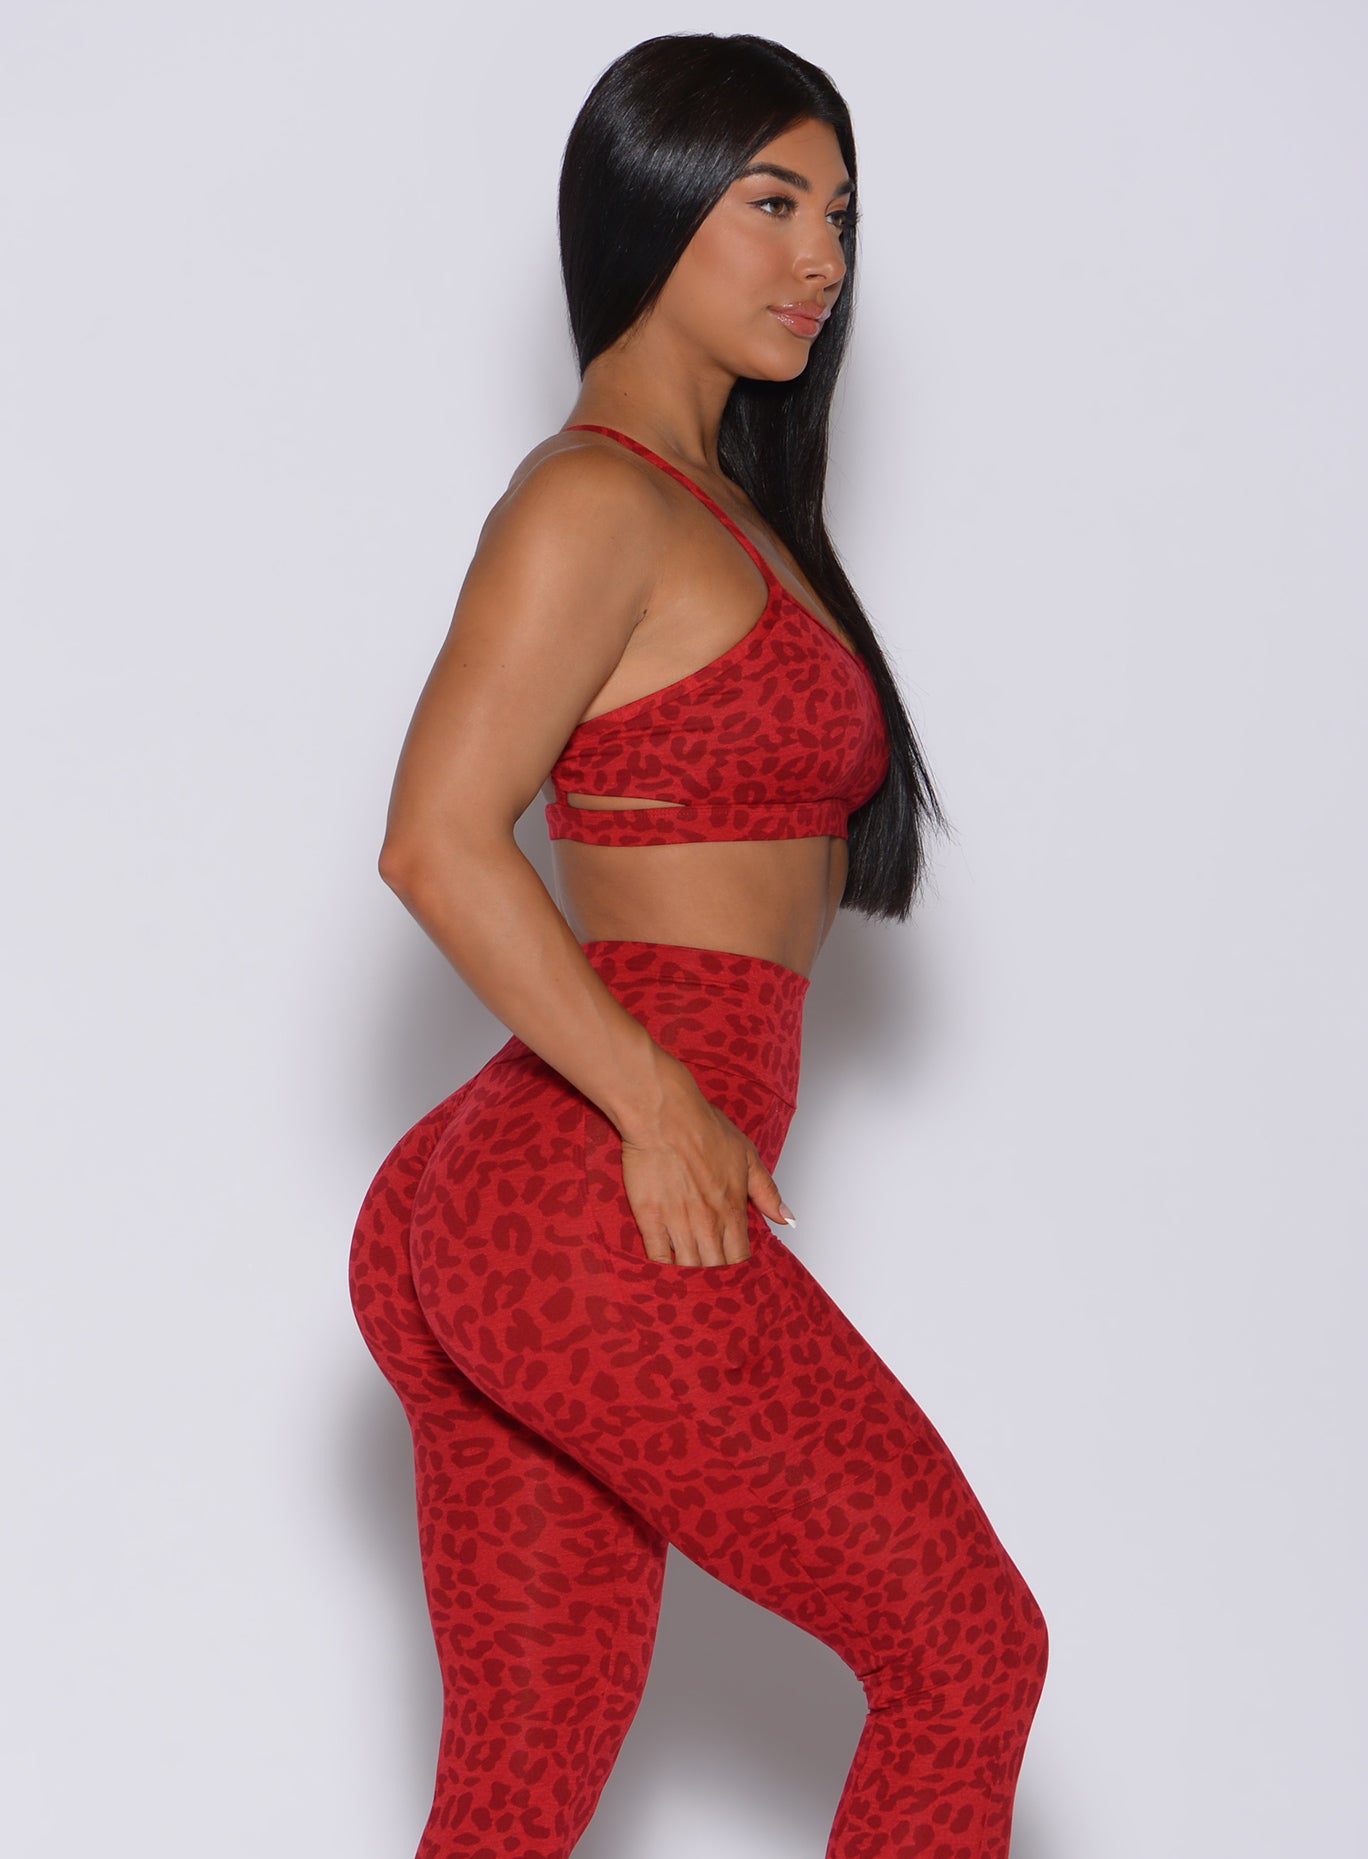 Right side profile view of a model in our pumped sports bra in red cheetah color and matching leggings